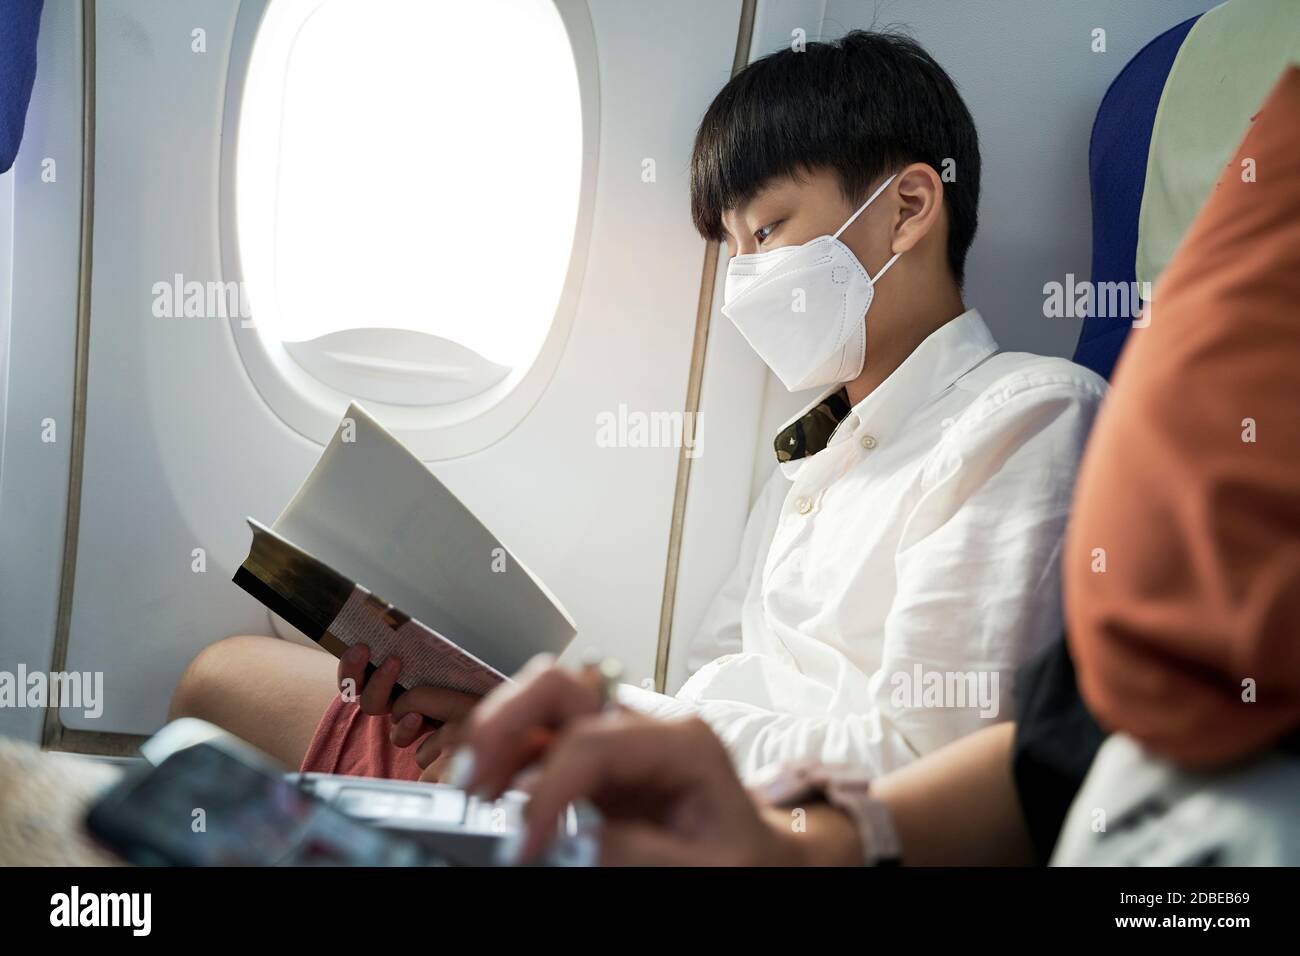 fifteen year old boy on airplane wearing face mask reading a book Stock Photo